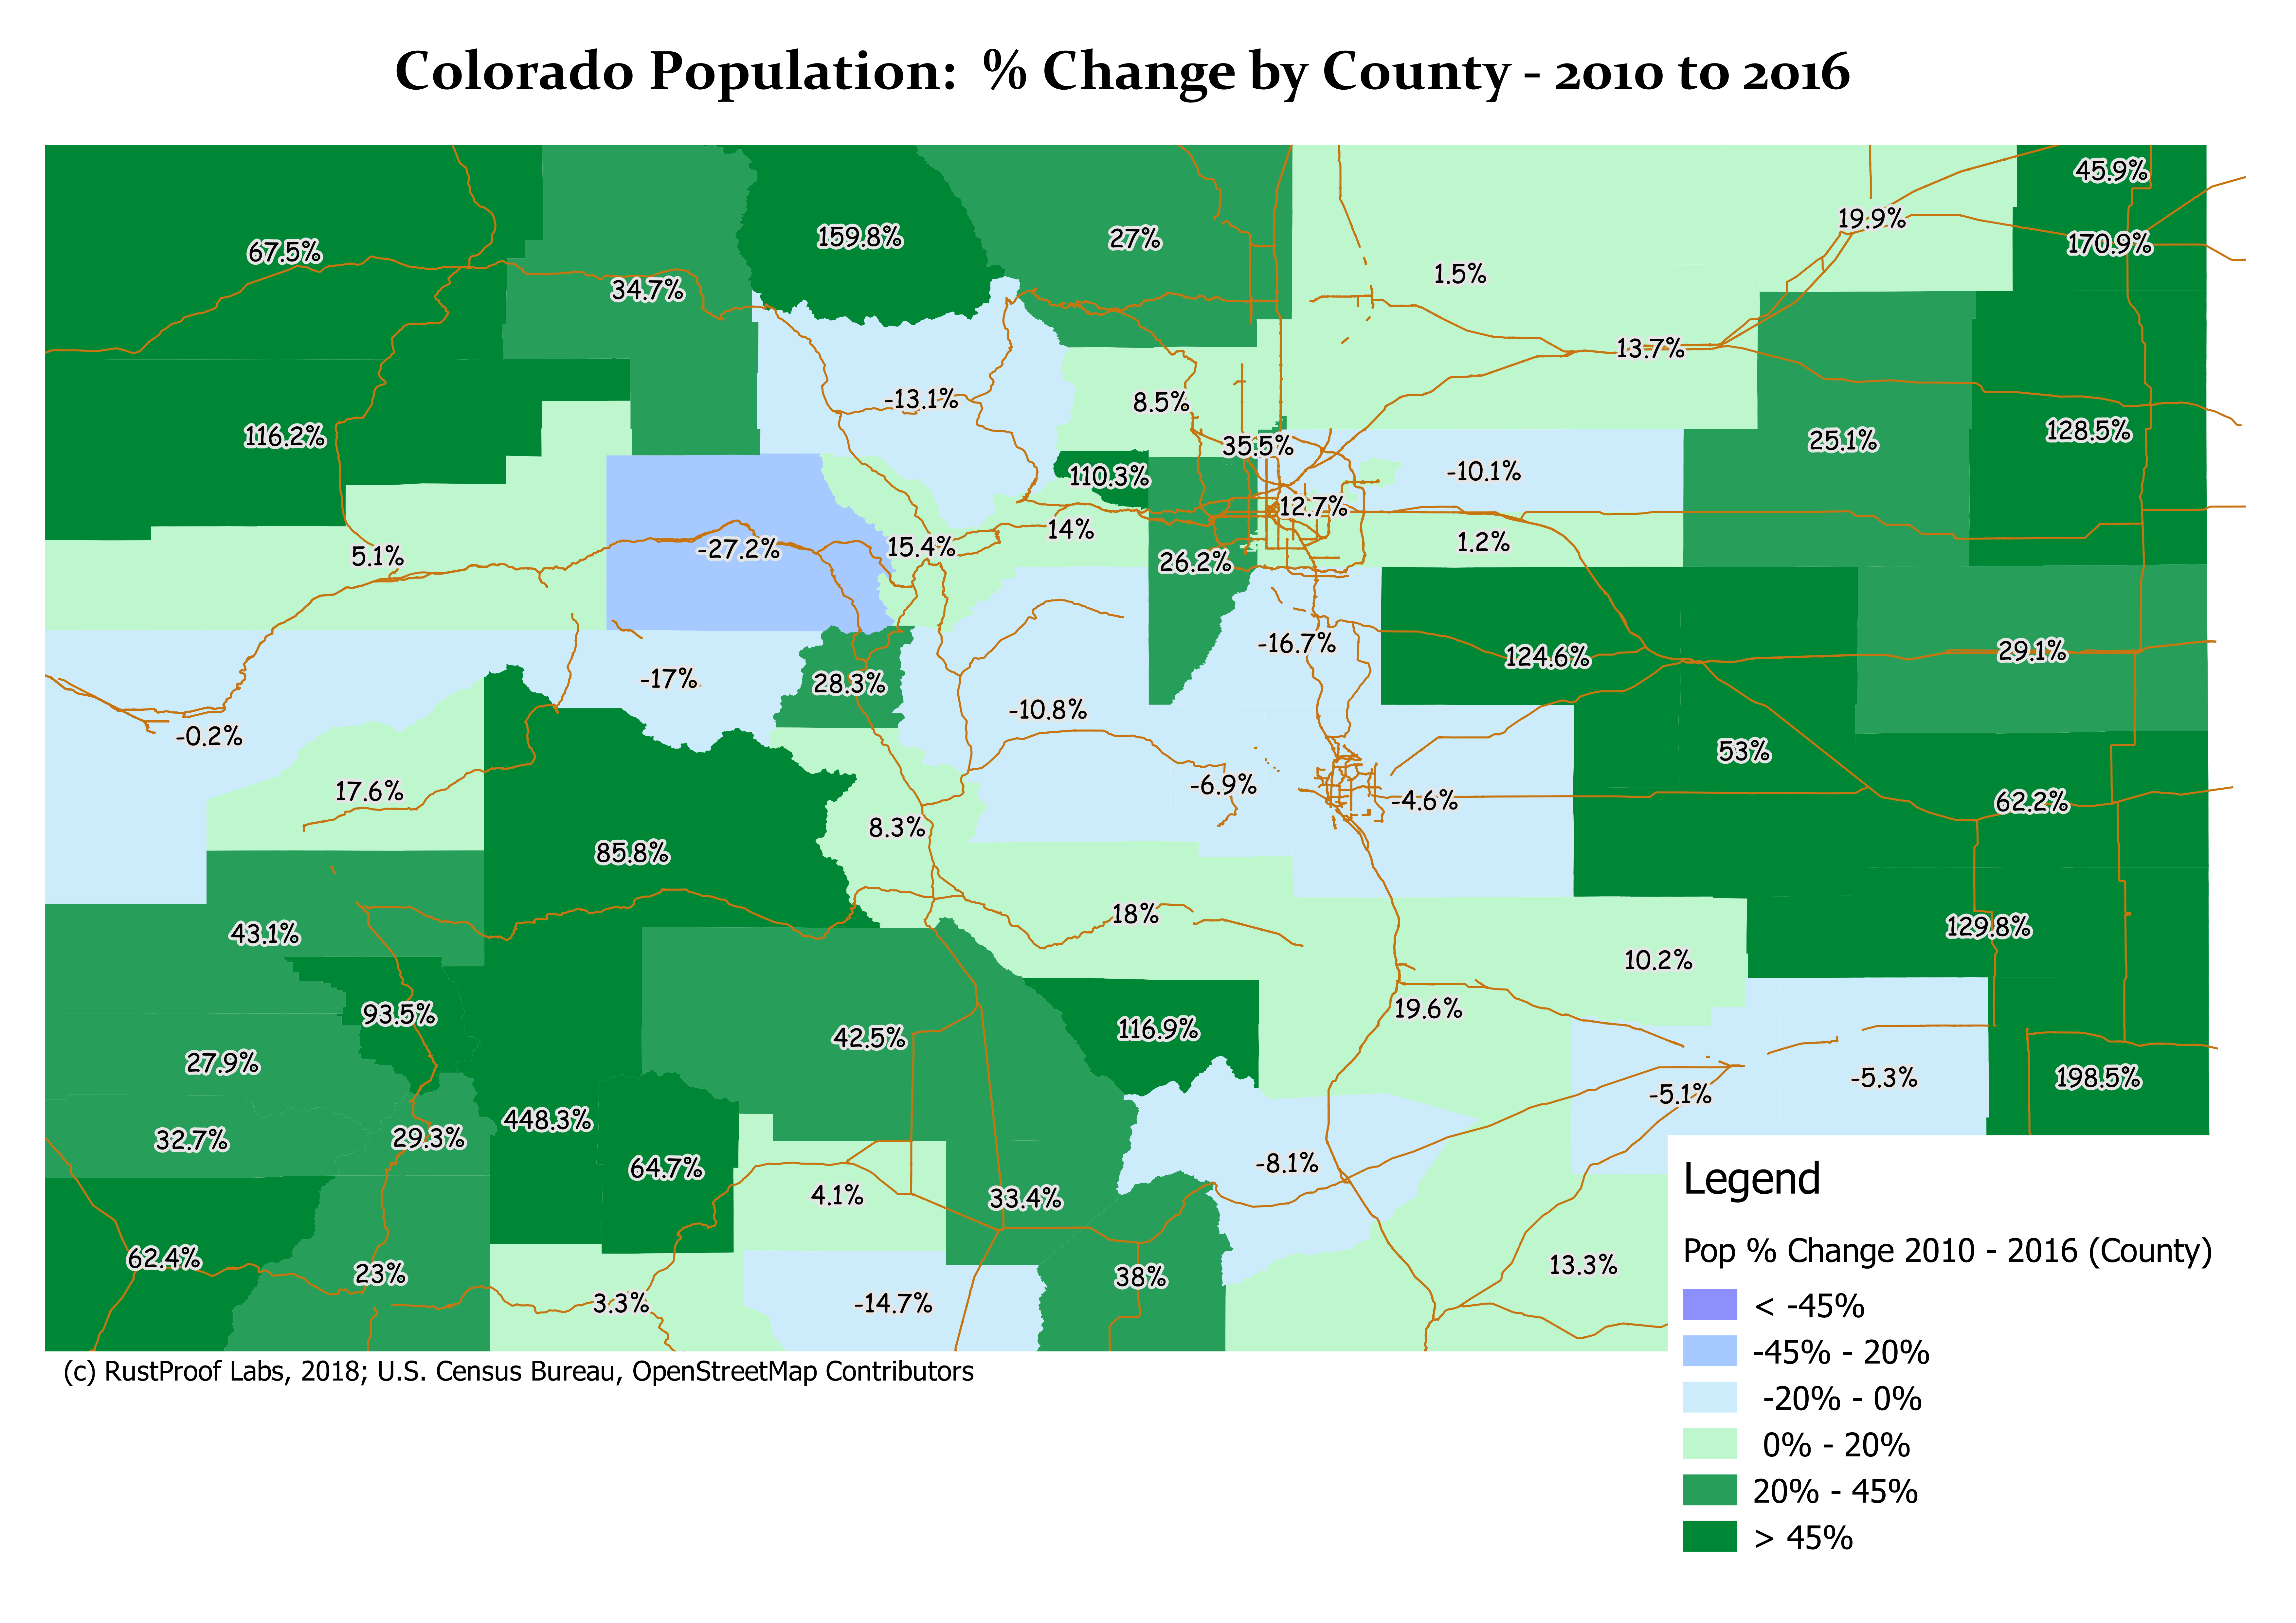 This map of Colorado shows growth occuring accross the majority of the counties in the state.  There are a few counties with losses in population.